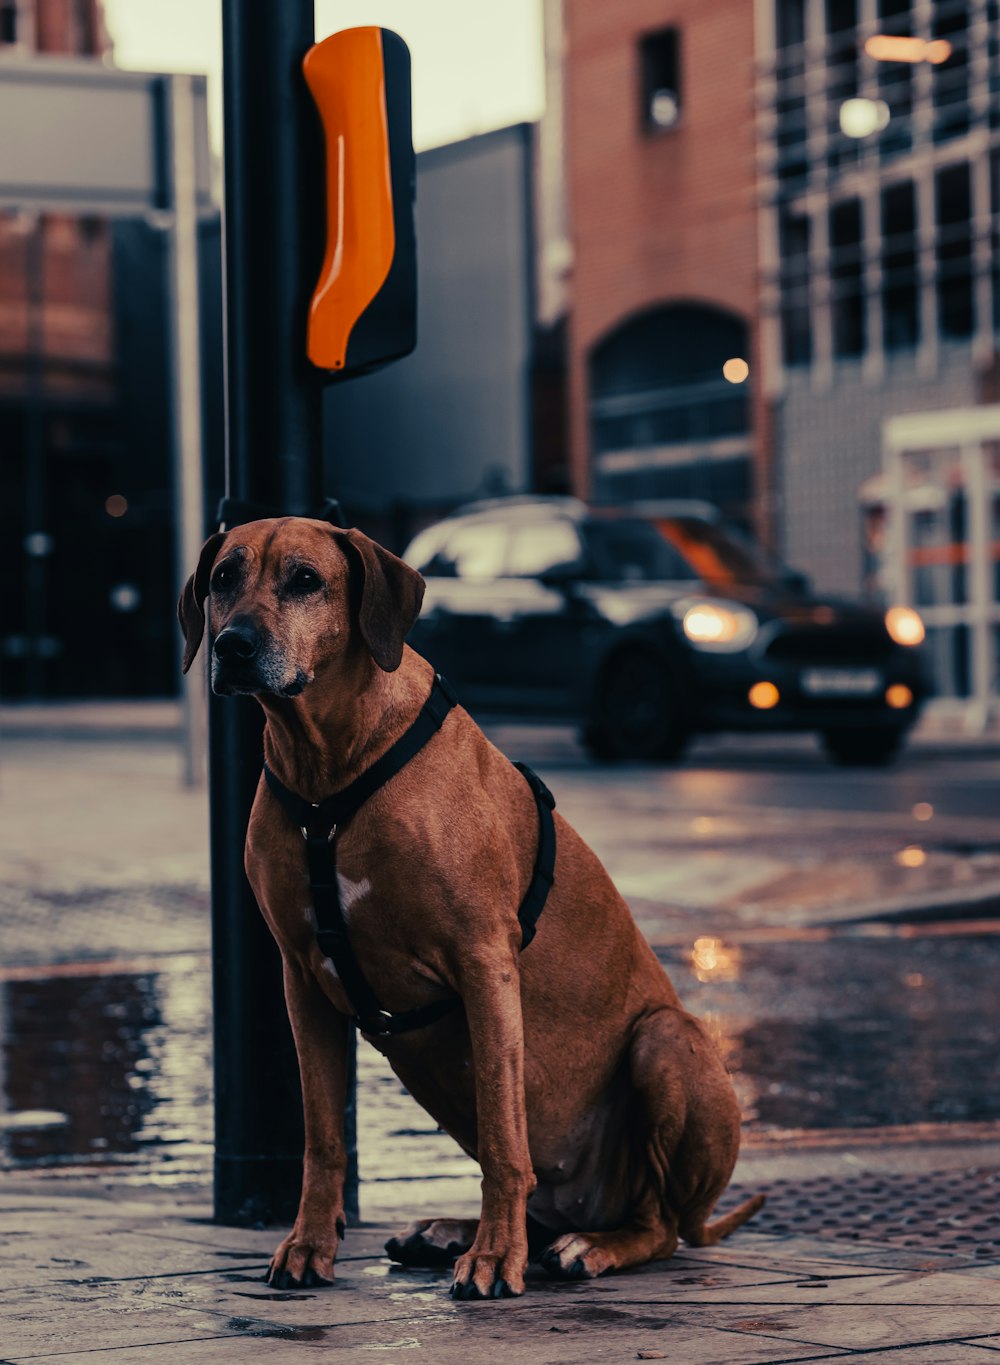 a brown dog sitting on a sidewalk next to a street sign